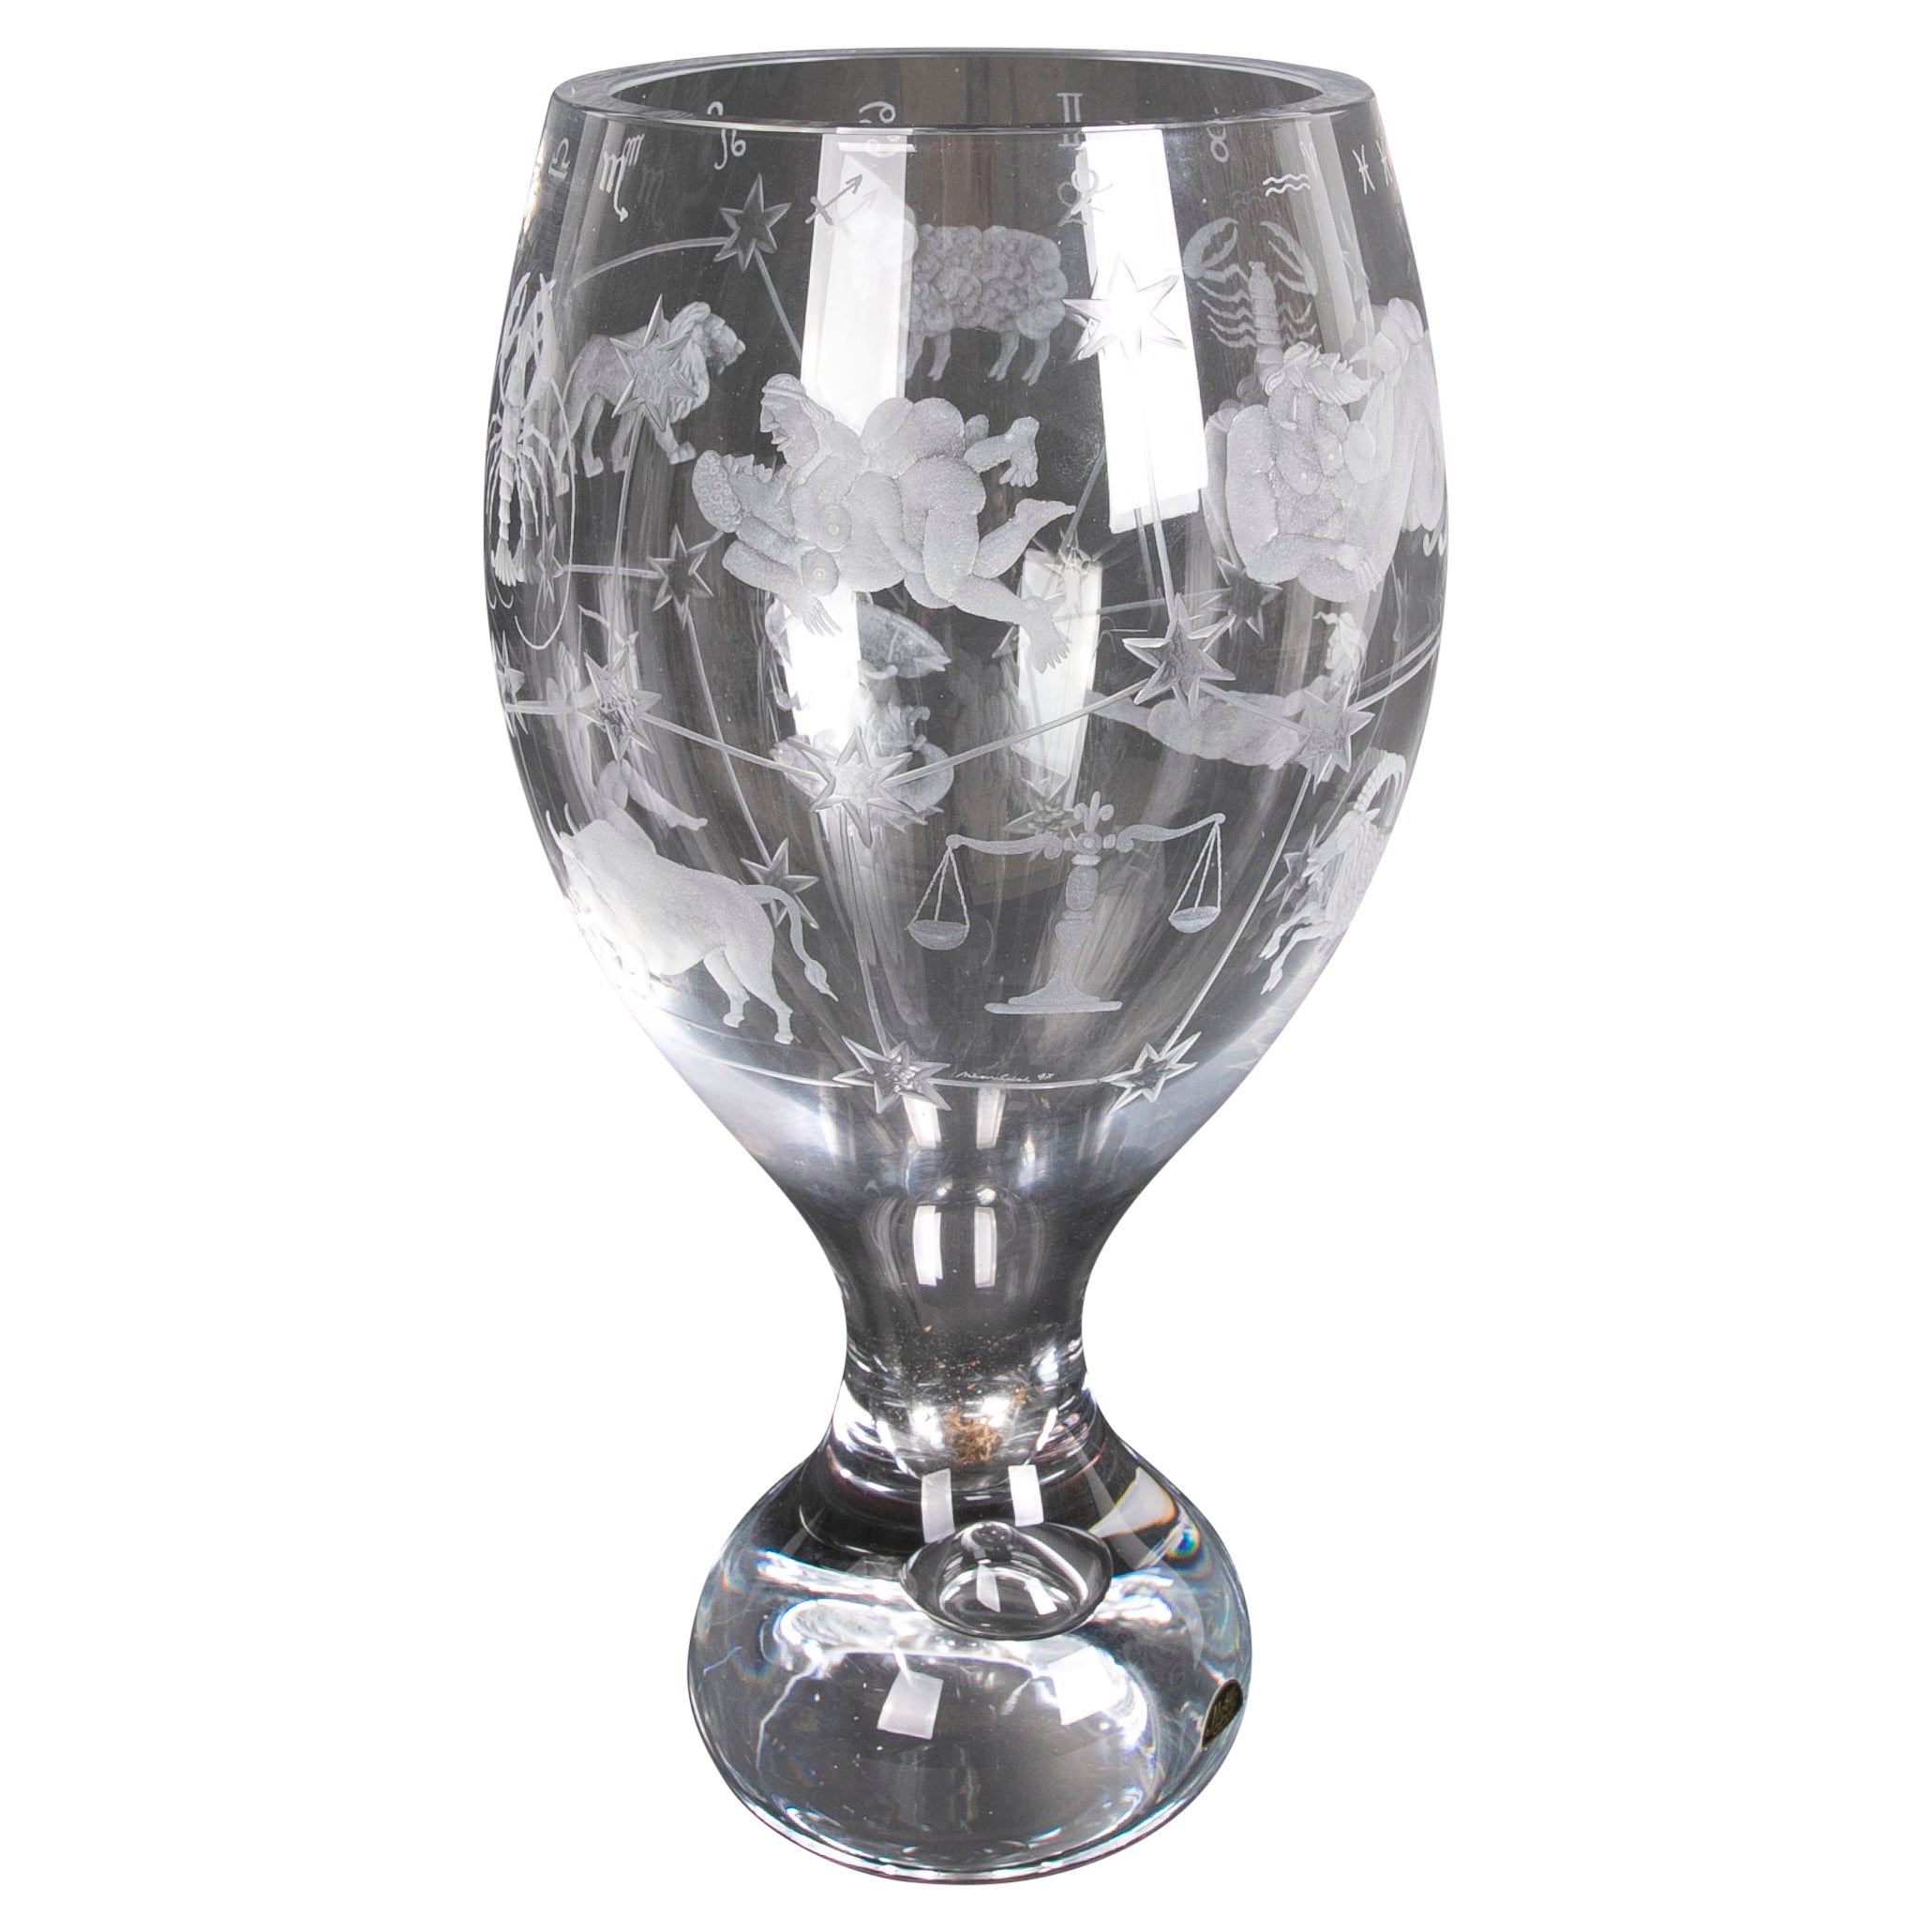 Hand-Cut Crystal Vase from the House of Mottl with Horoscope Scenes For Sale